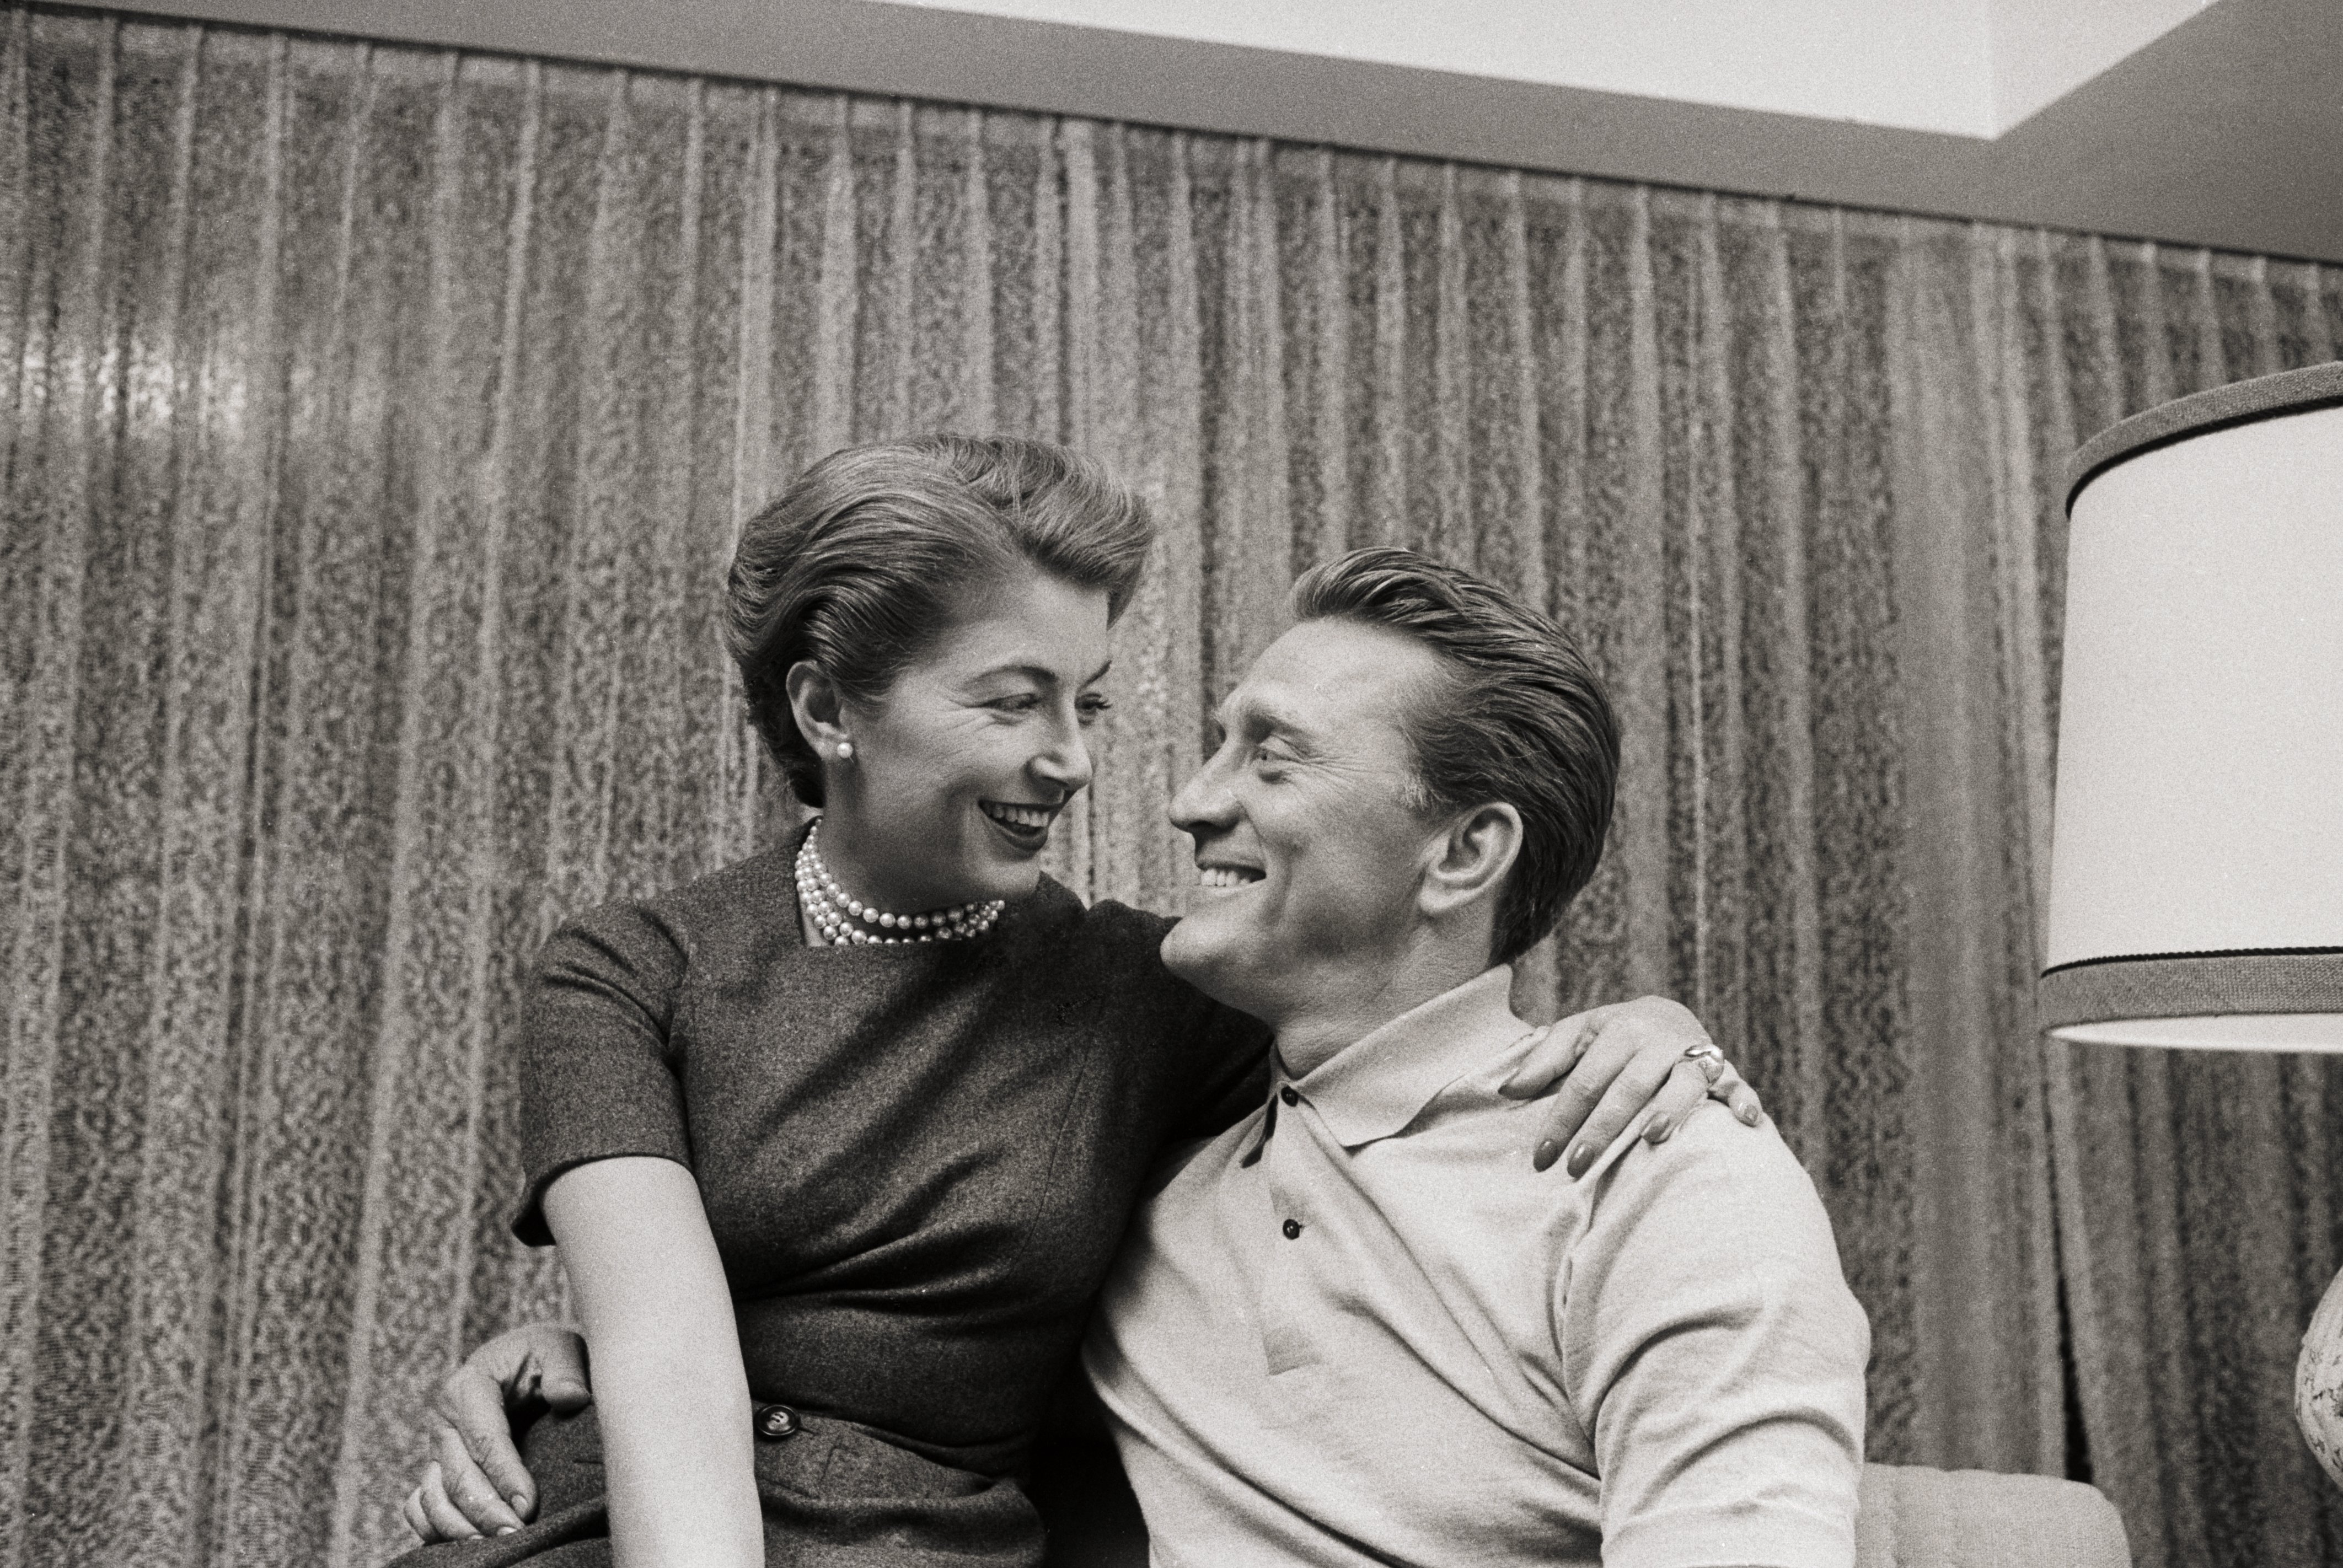 Kirk Douglas and his spouse Anne Douglas gaze at each other in a portrait photo. | Photo: Getty Images